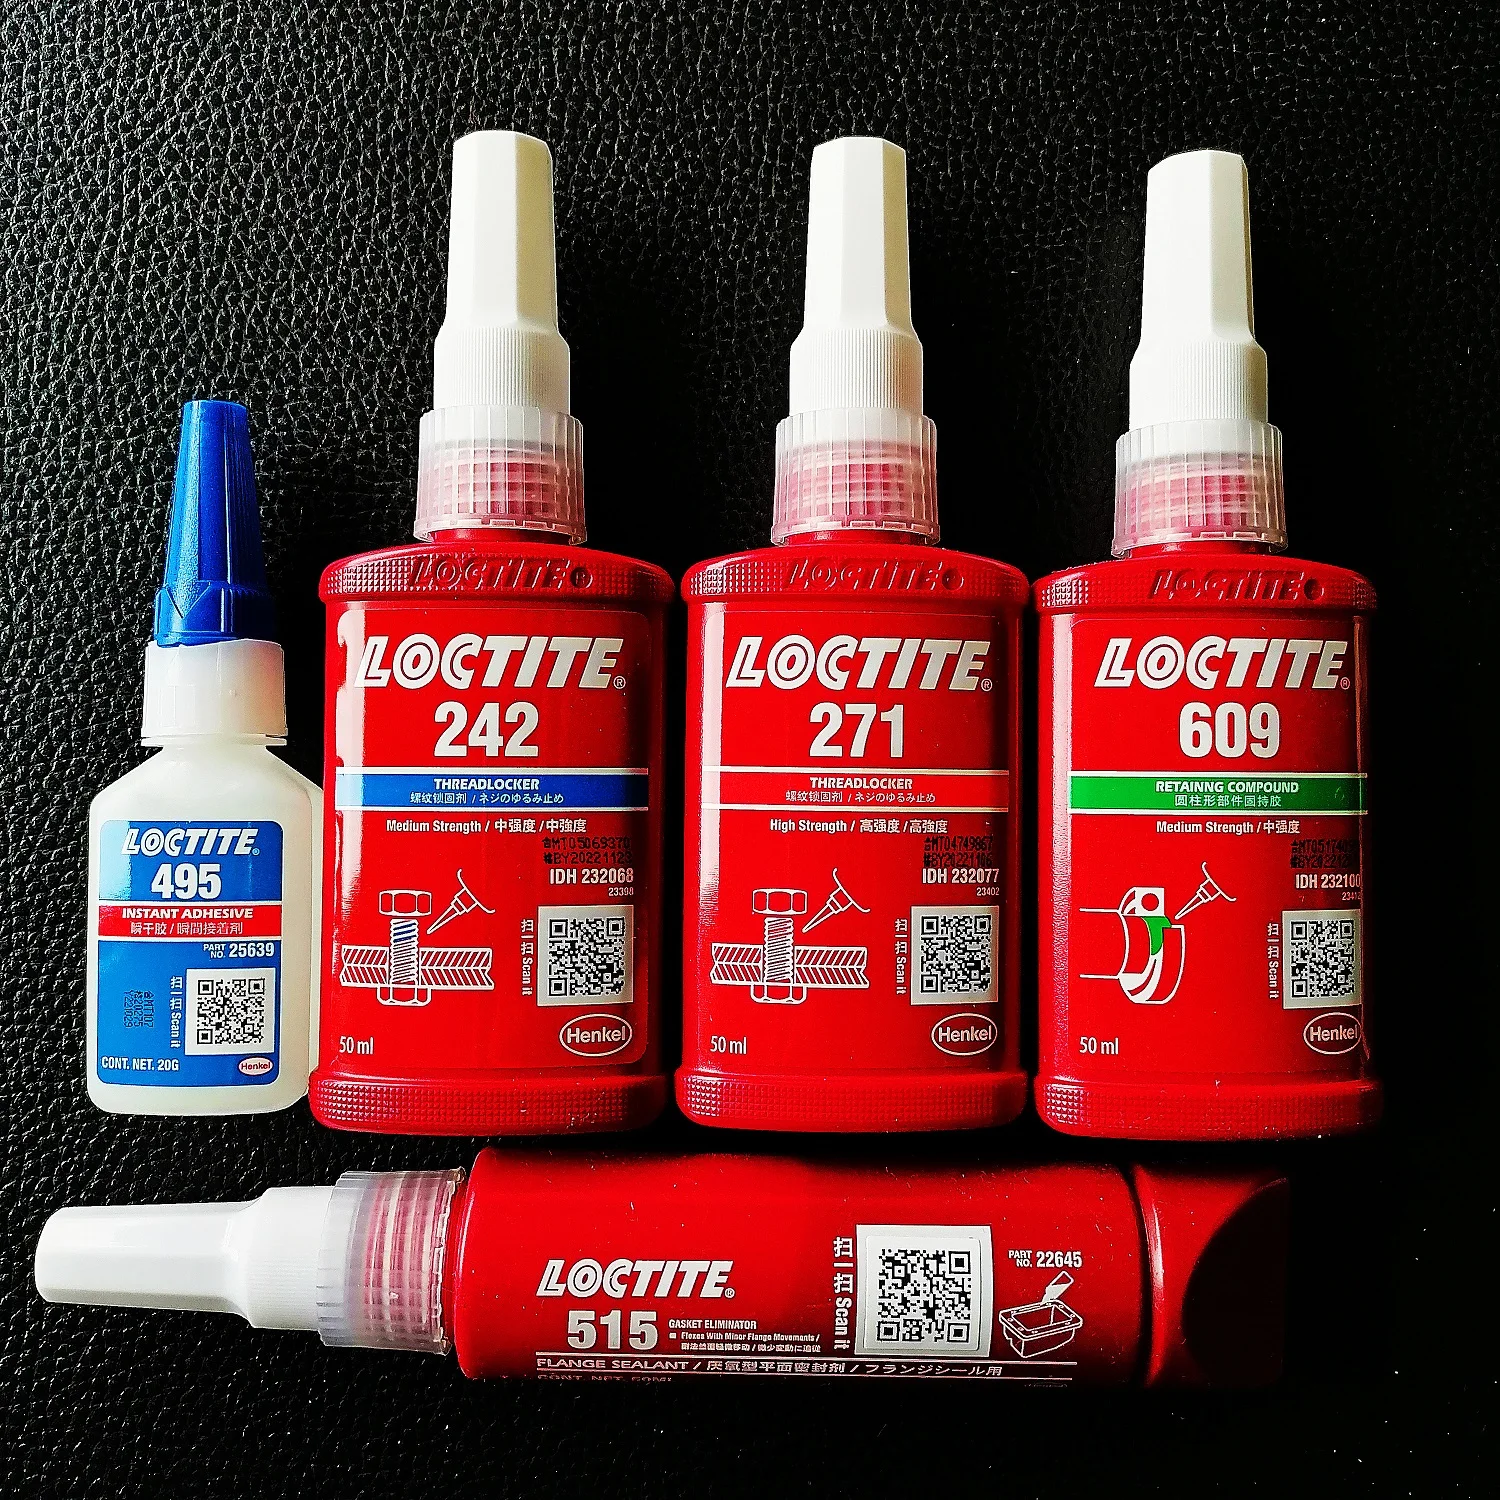 Loctite 401 Instant Adhesive and Other Loctite Variants